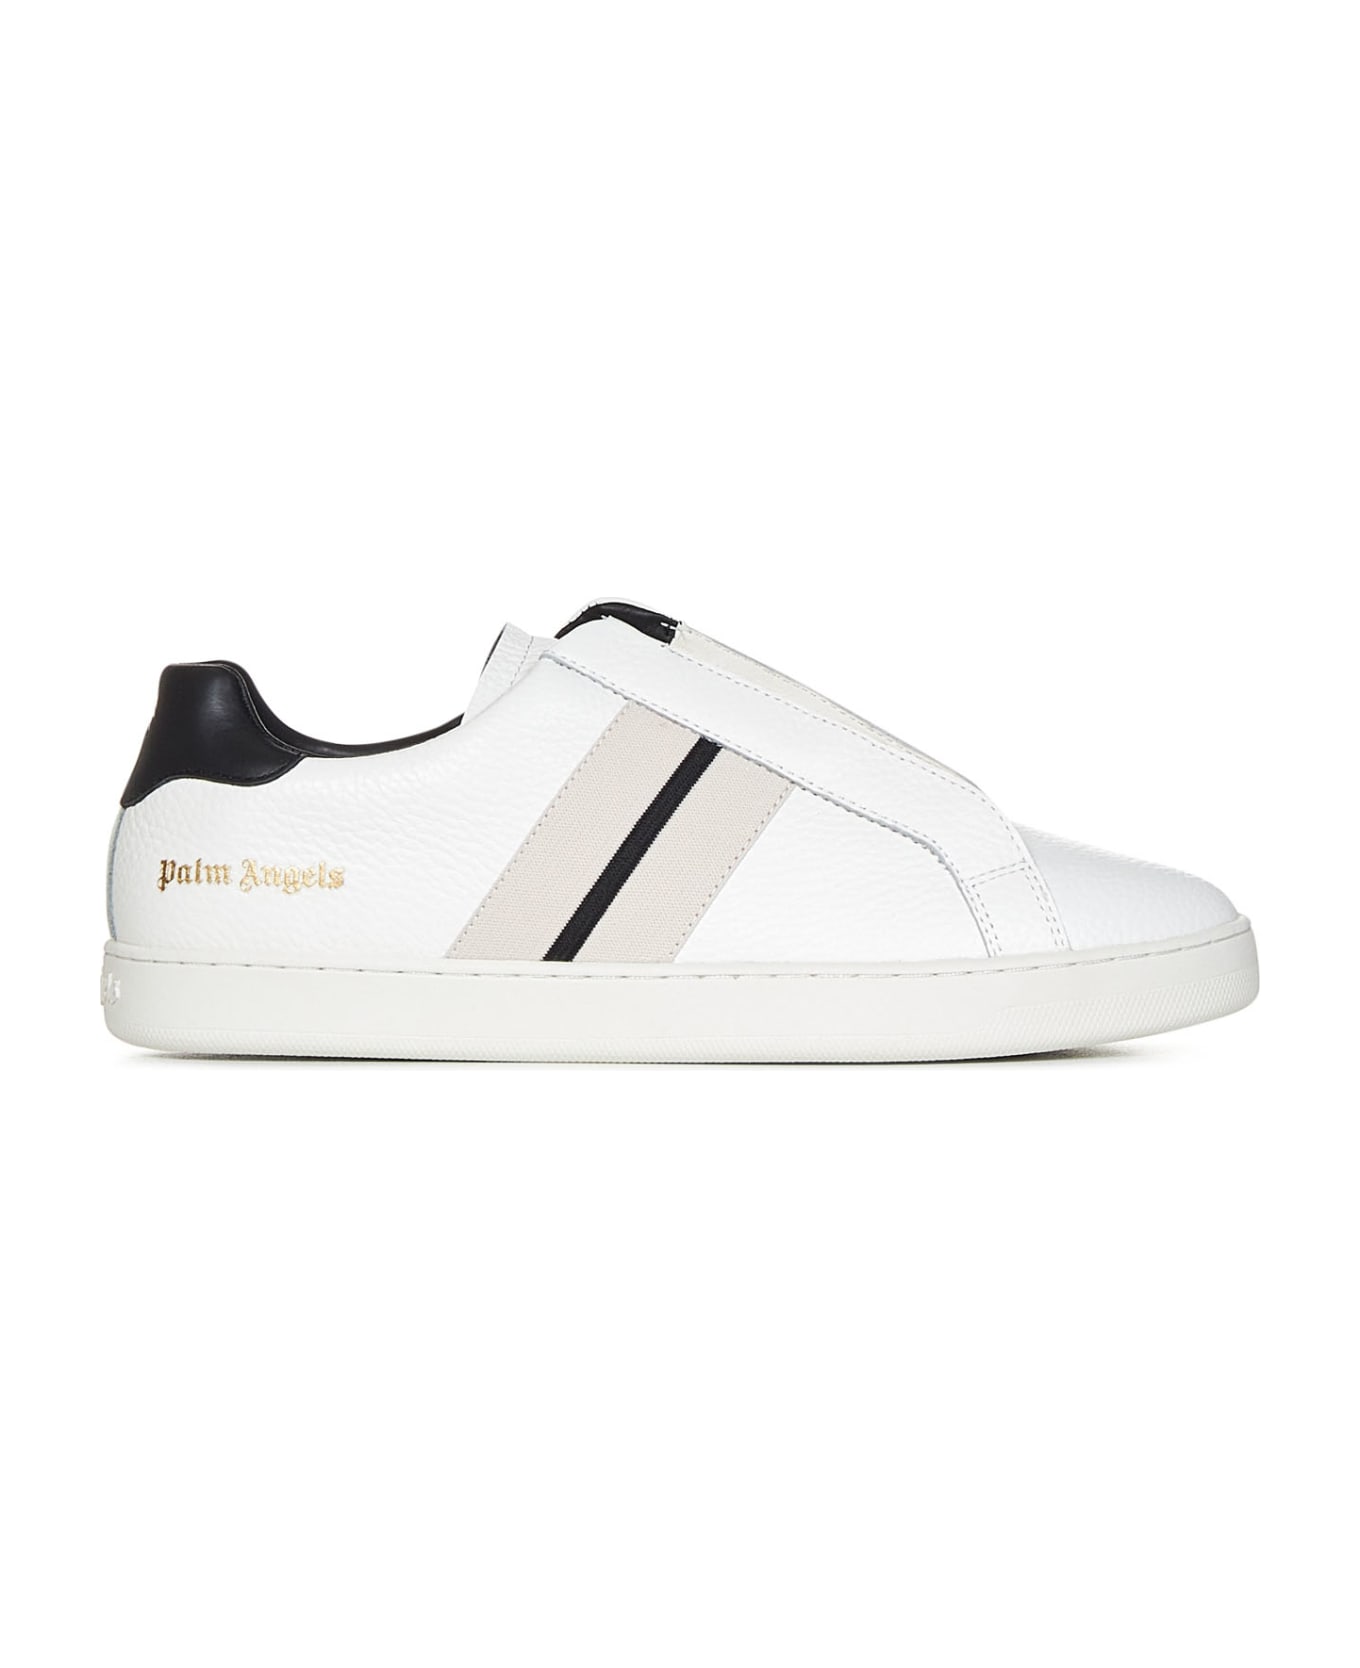 Palm Angels Track Palm Sneakers - Black